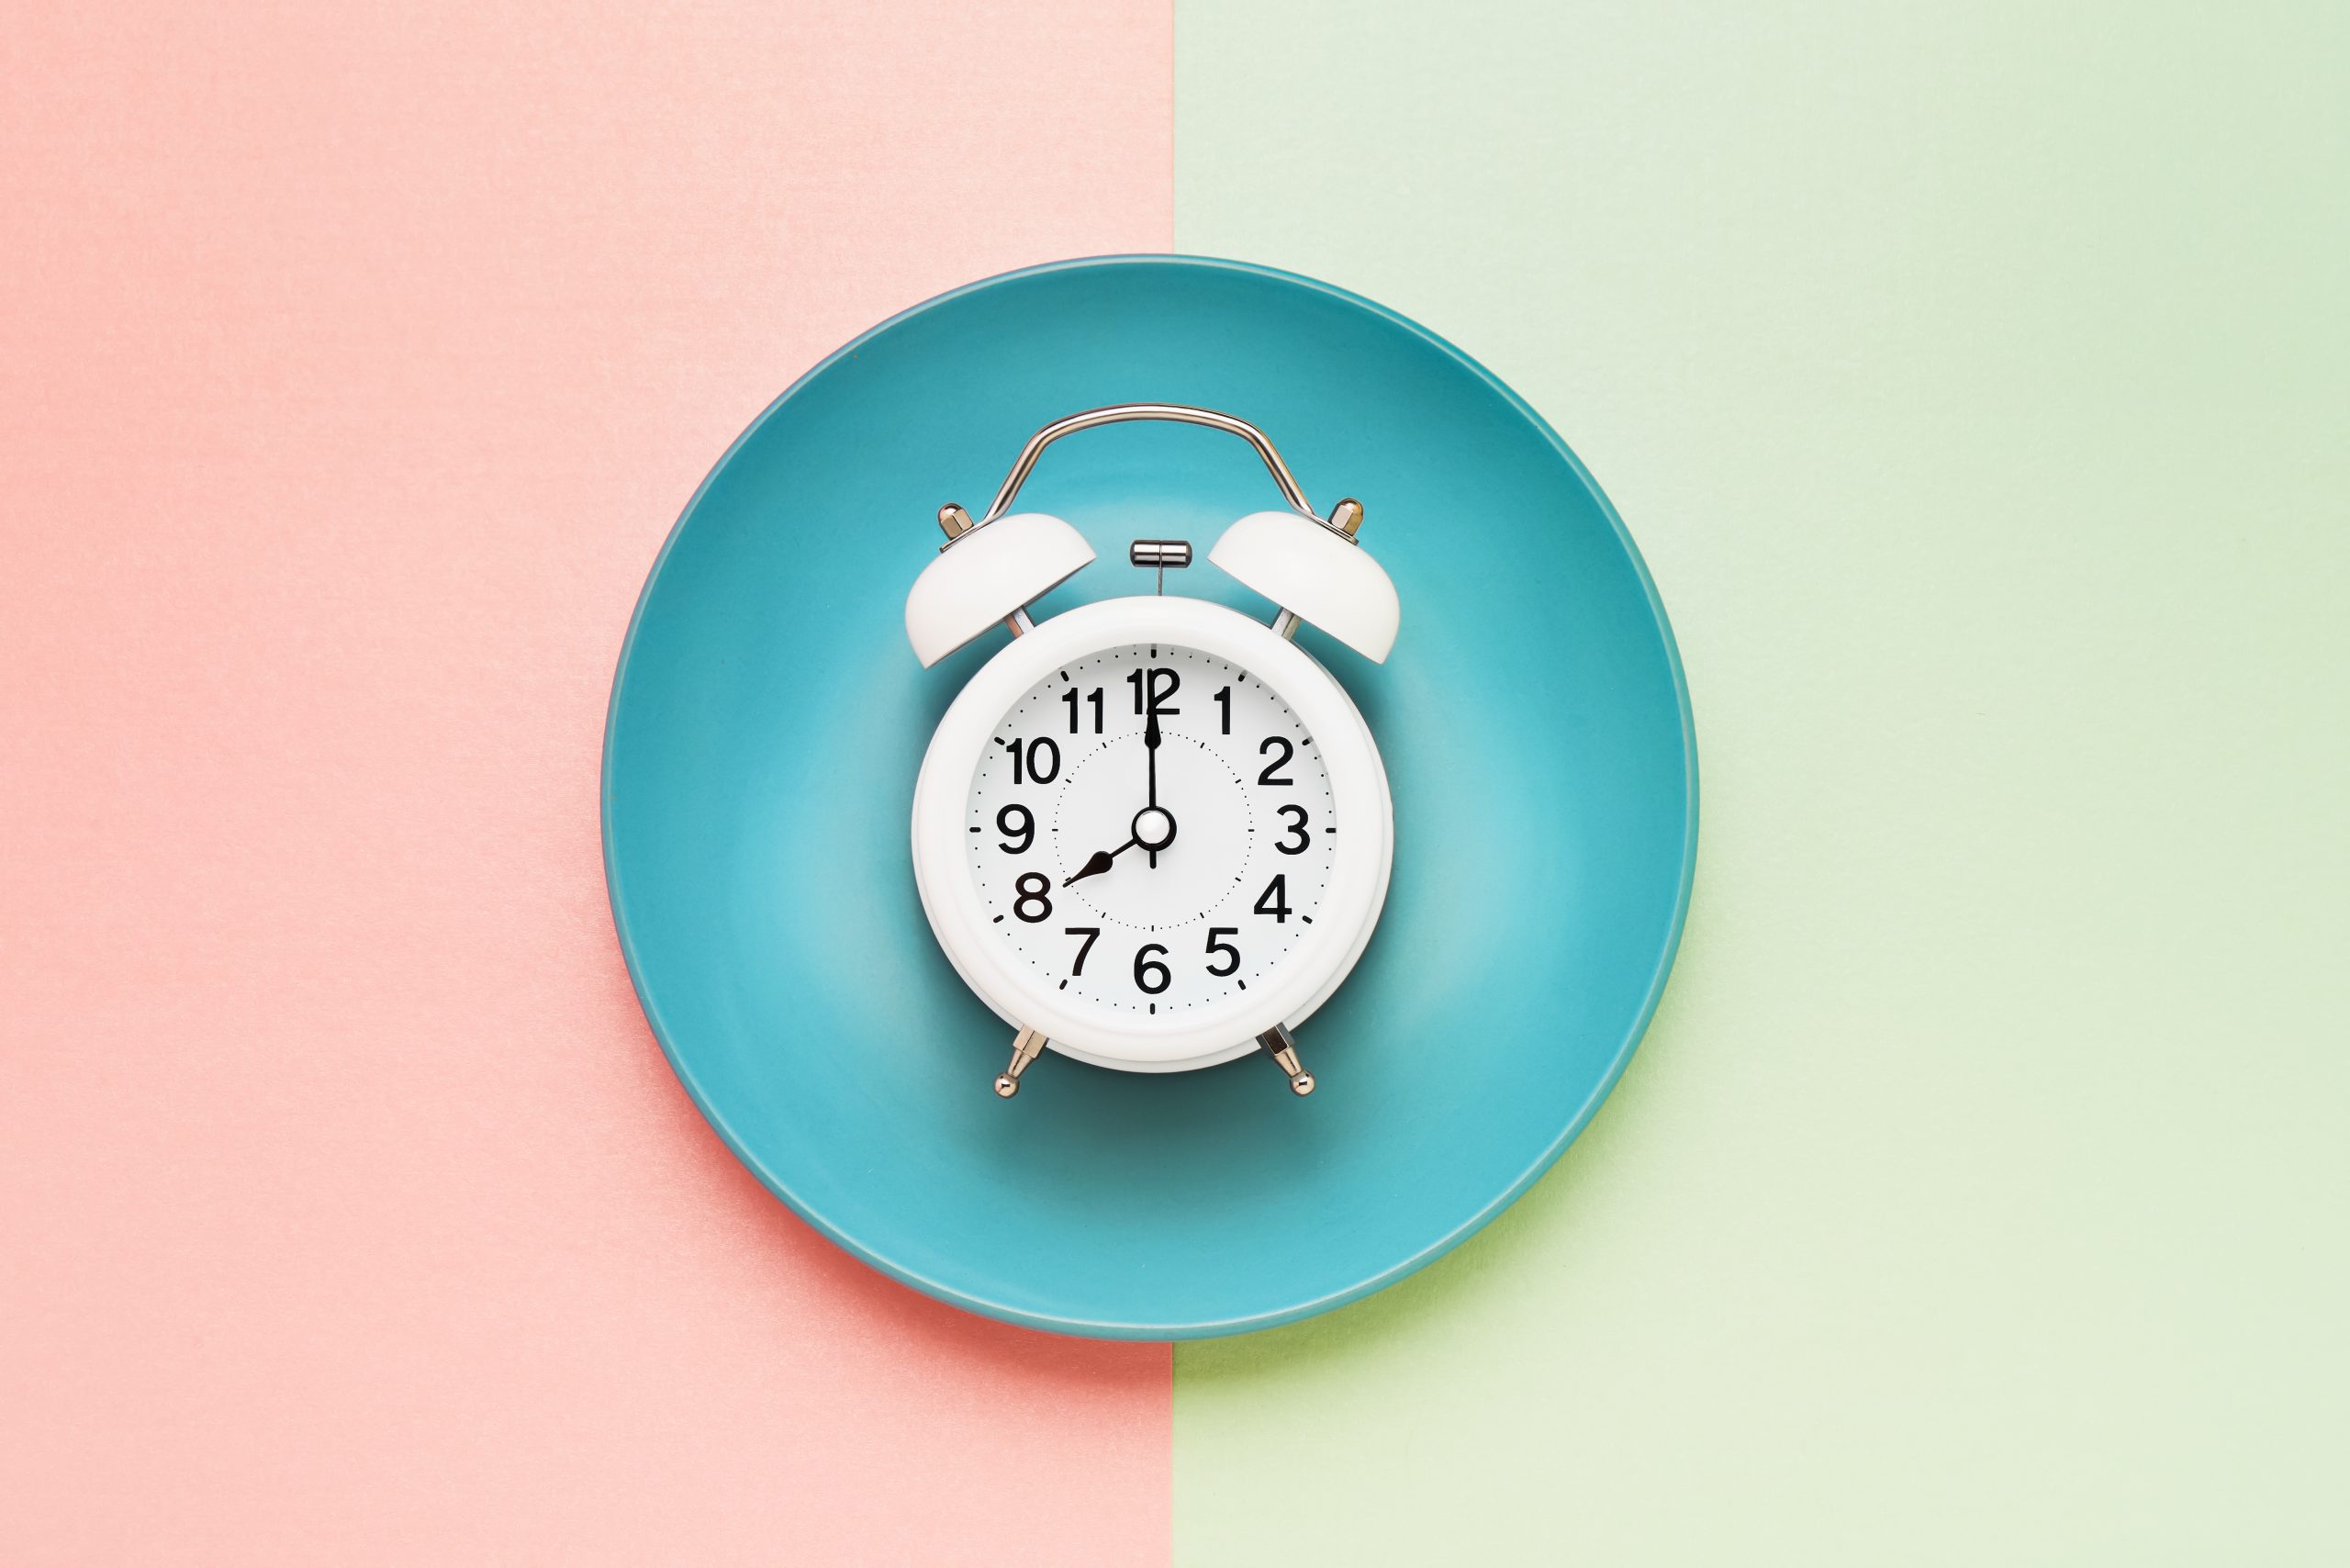 Intermittent fasting concept. White alarm clock on empty blue plate. Top view, copy space